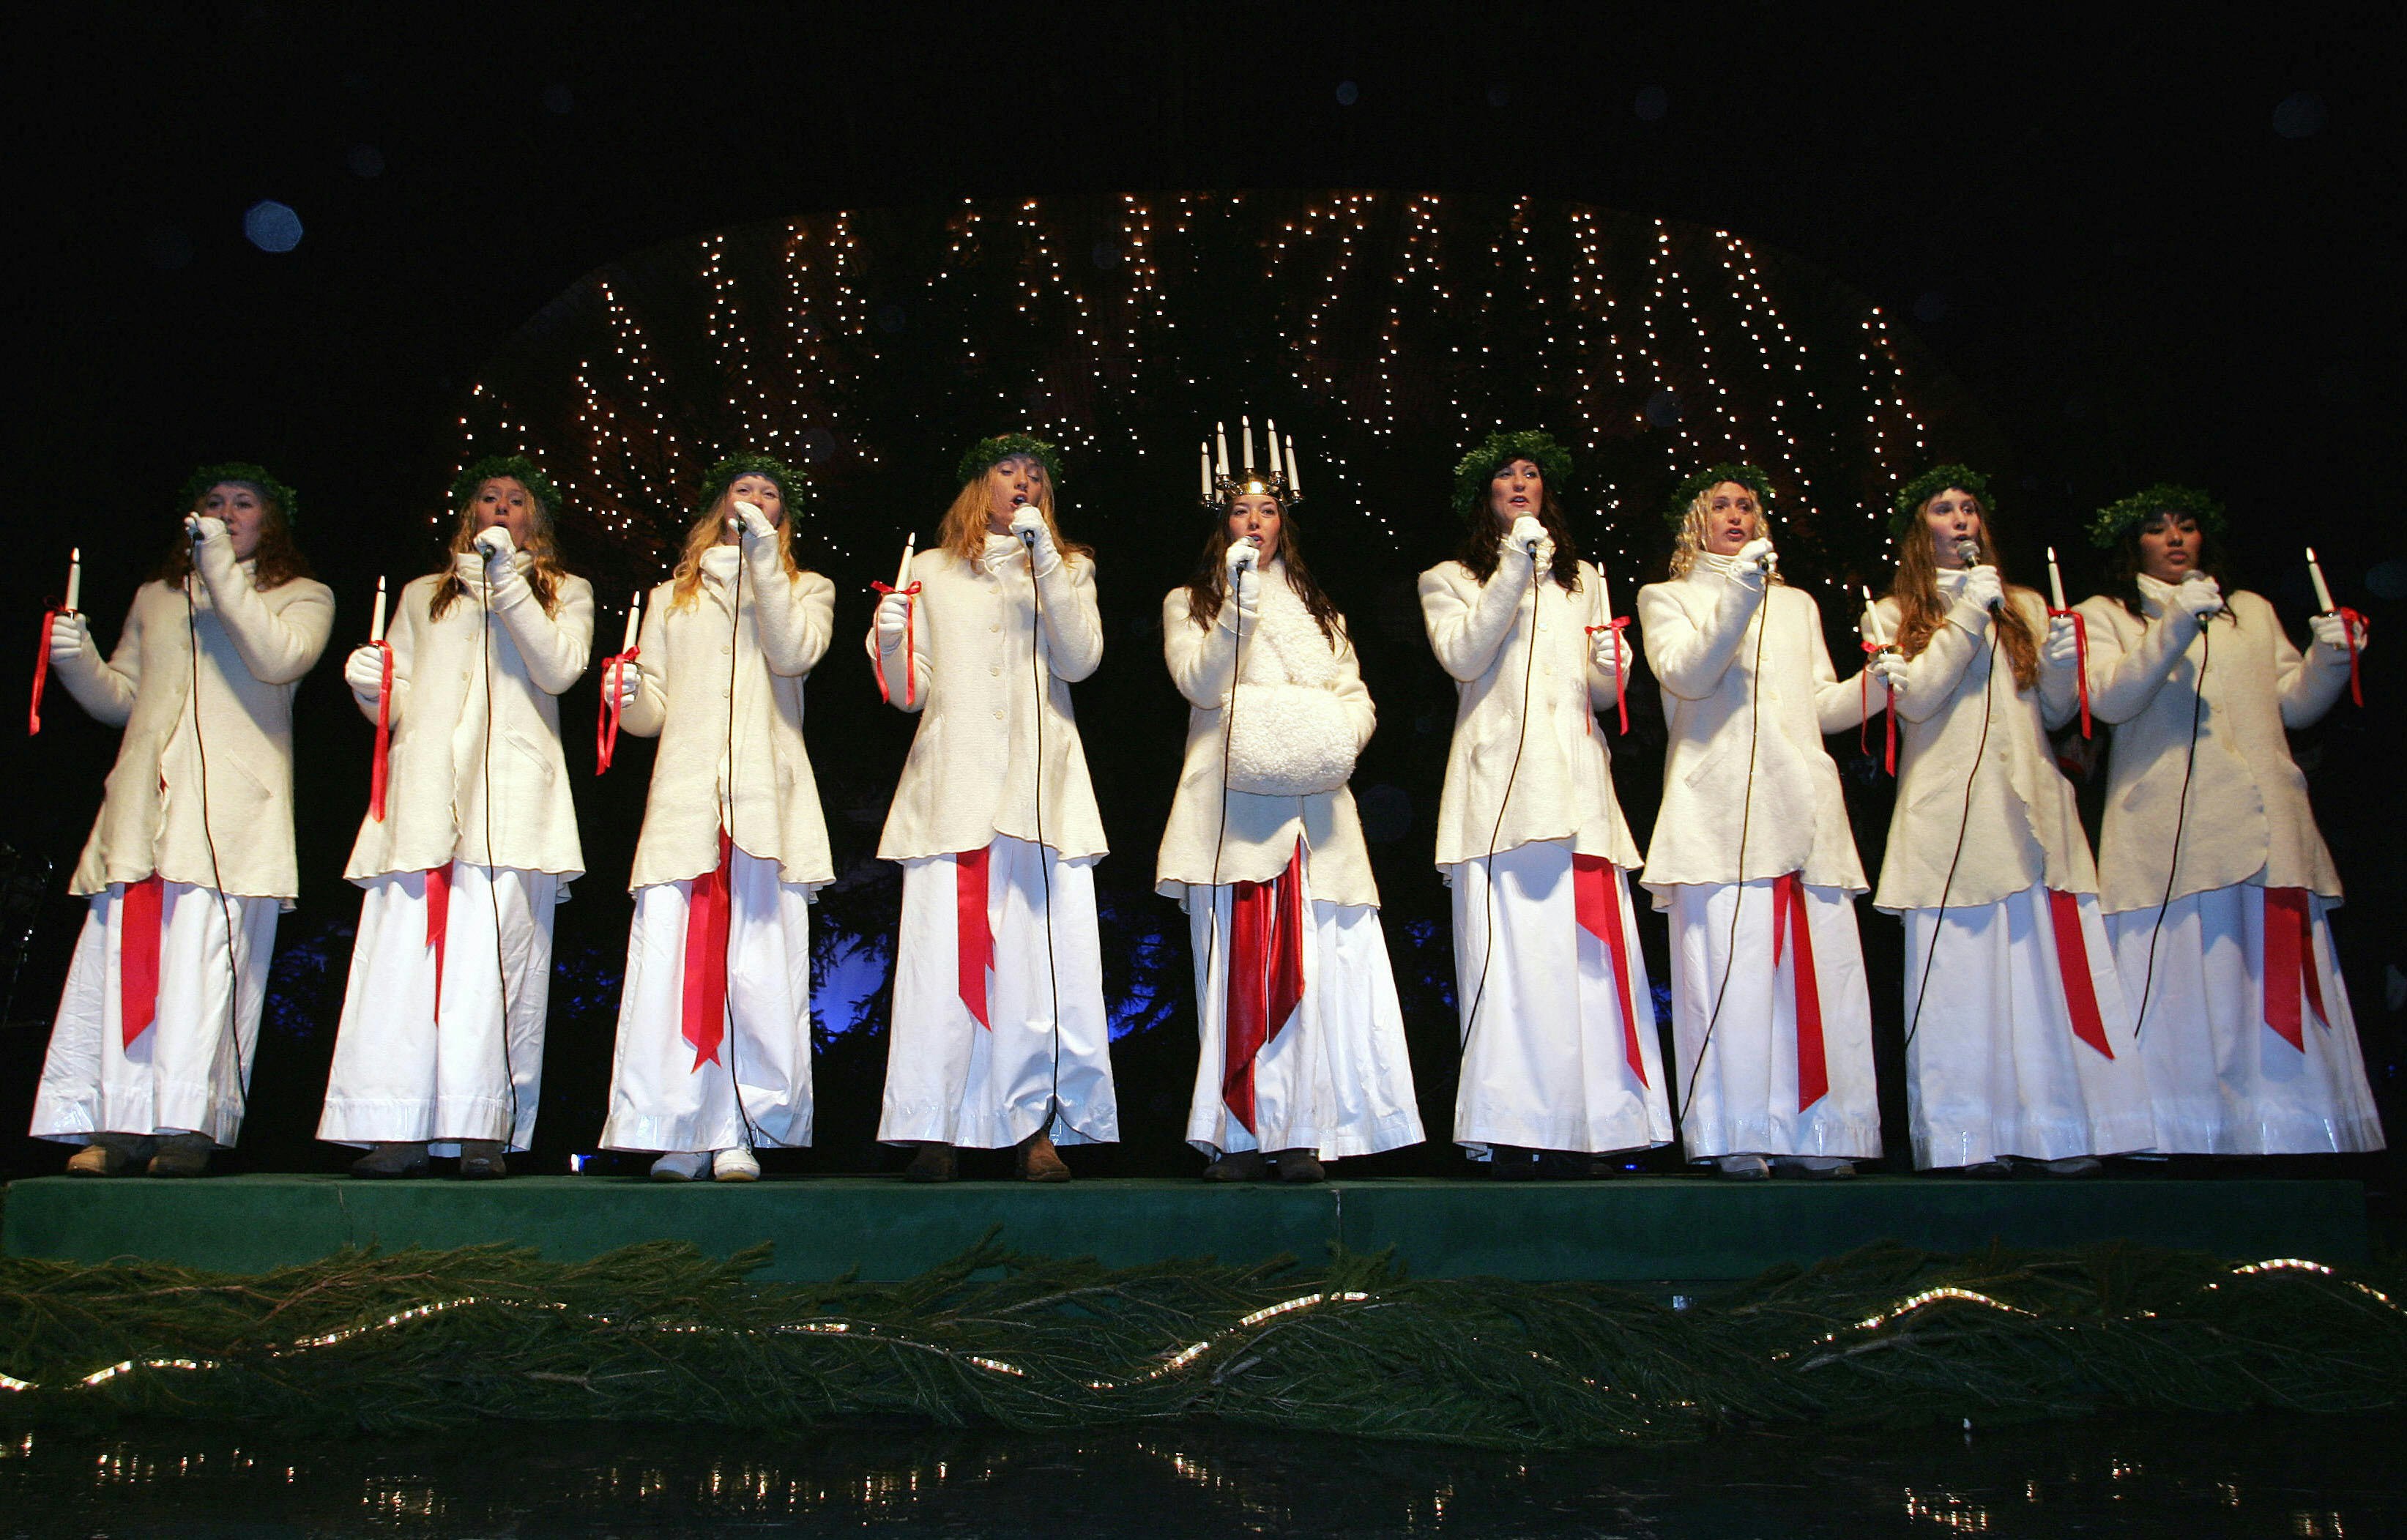 a line of women in white dresses and wreaths on their heads singing on a stage